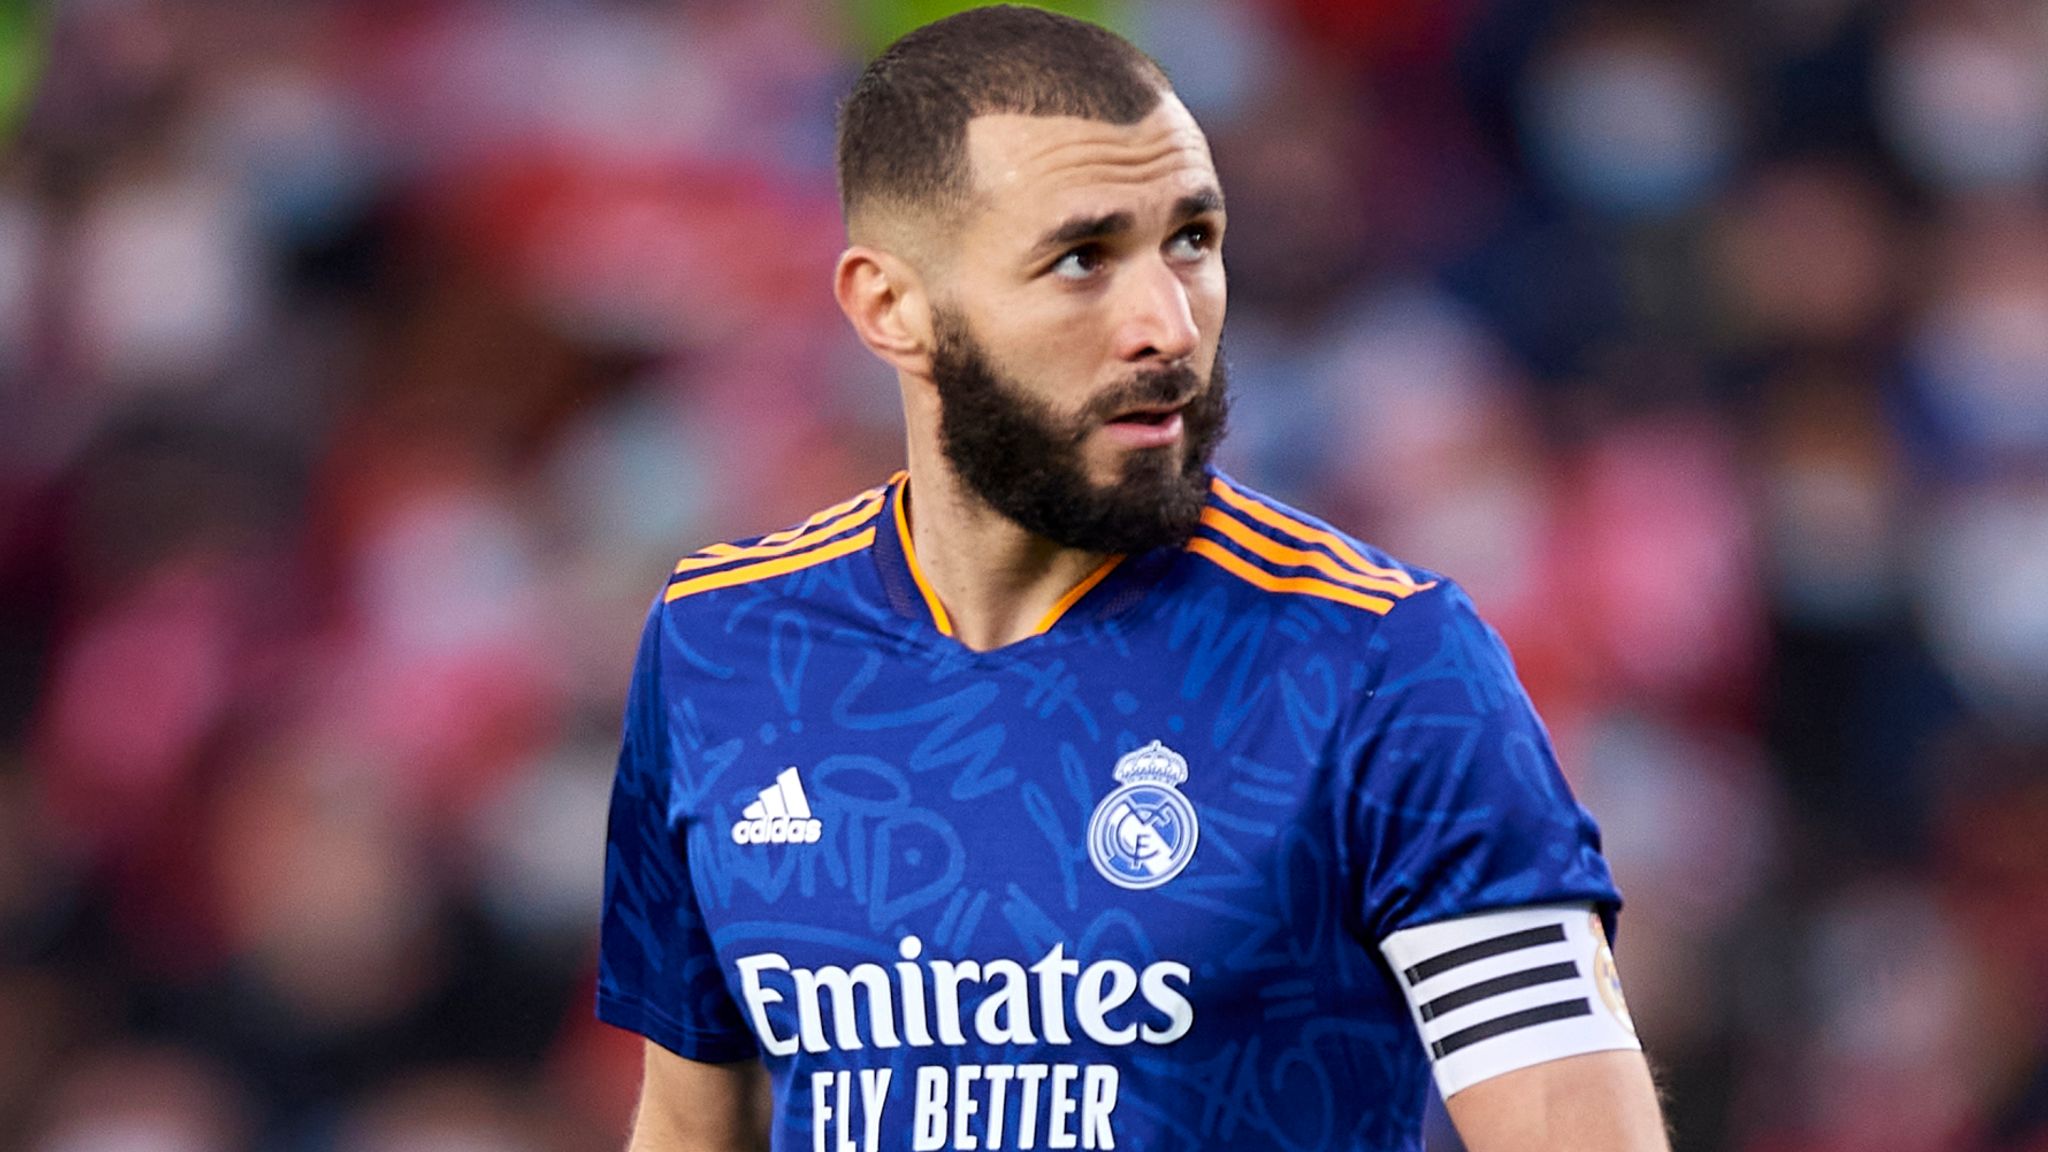 Karim Benzema: Real Madrid striker guilty of complicity in attempted sex tape blackmail of Mathieu Valbuena